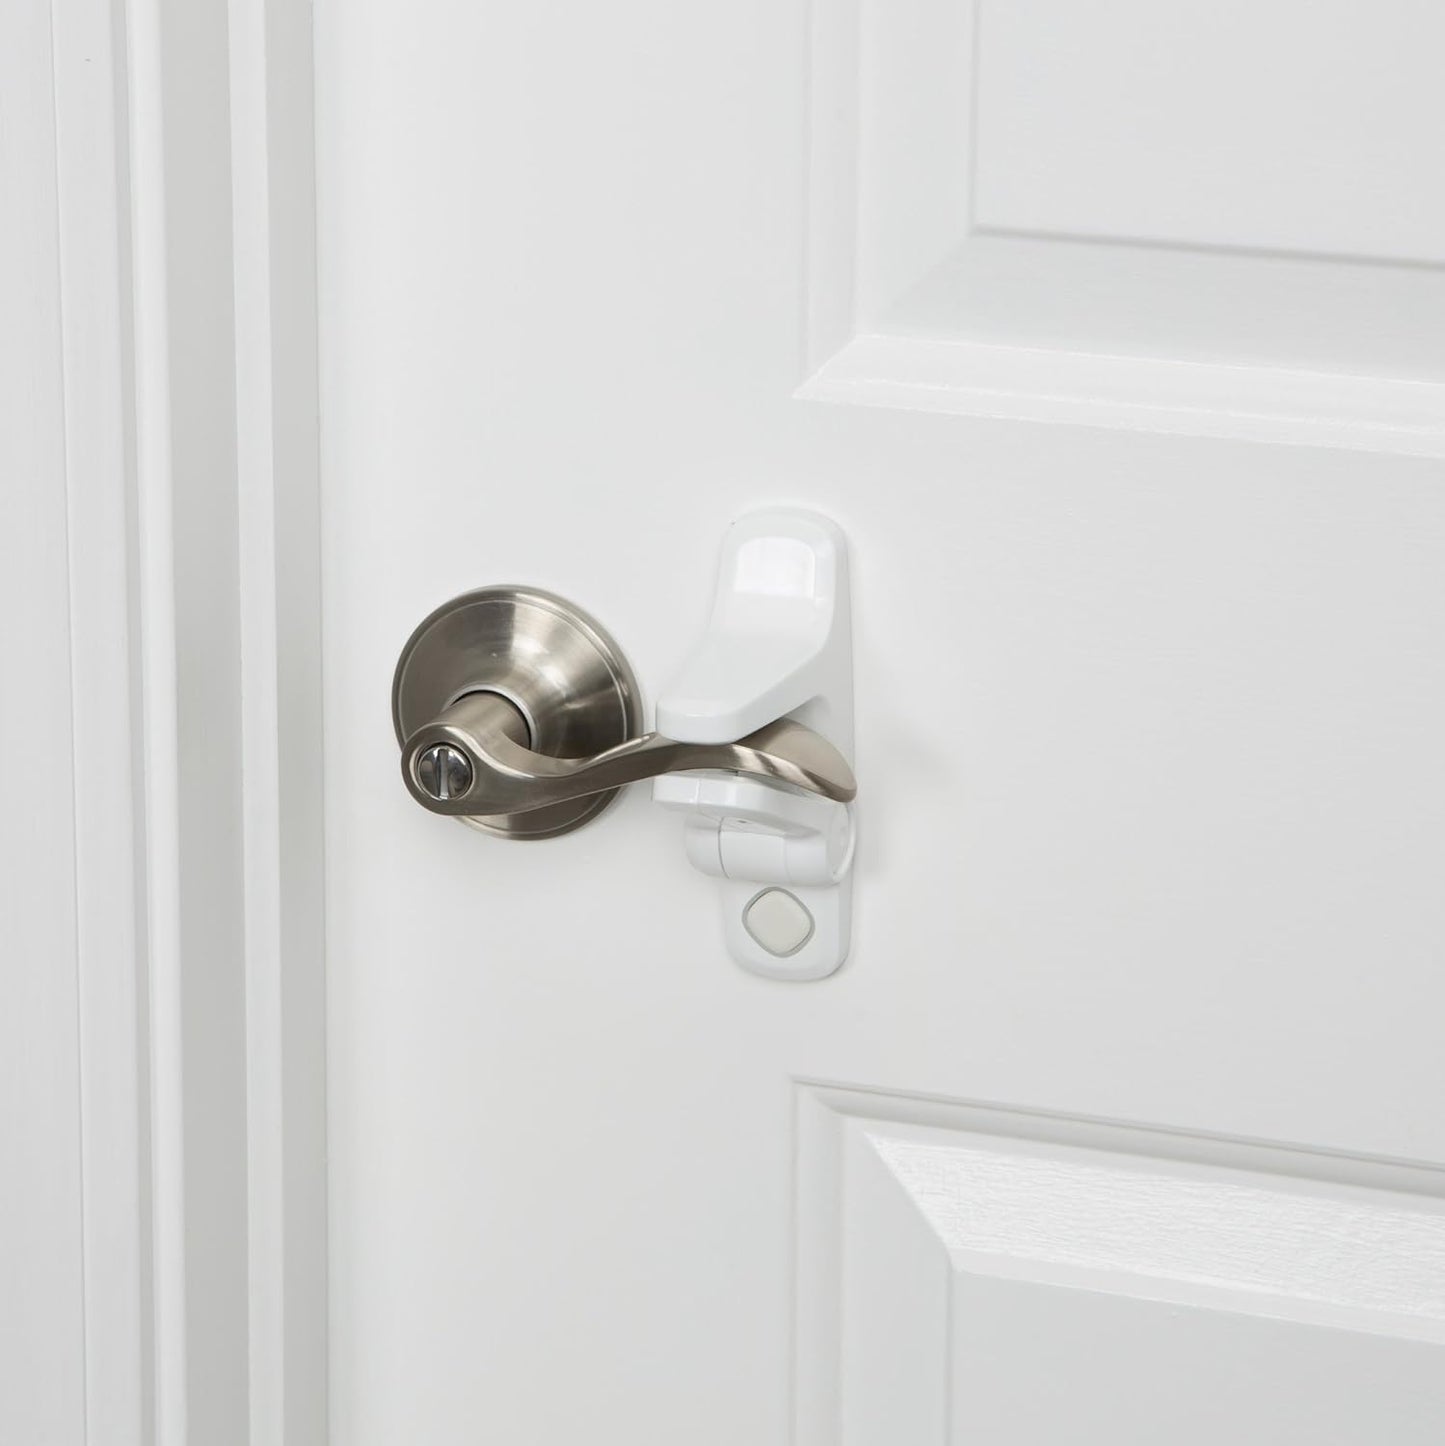 Safety 1st OutSmart Child Proof Door Lever Lock, White, 1 Count